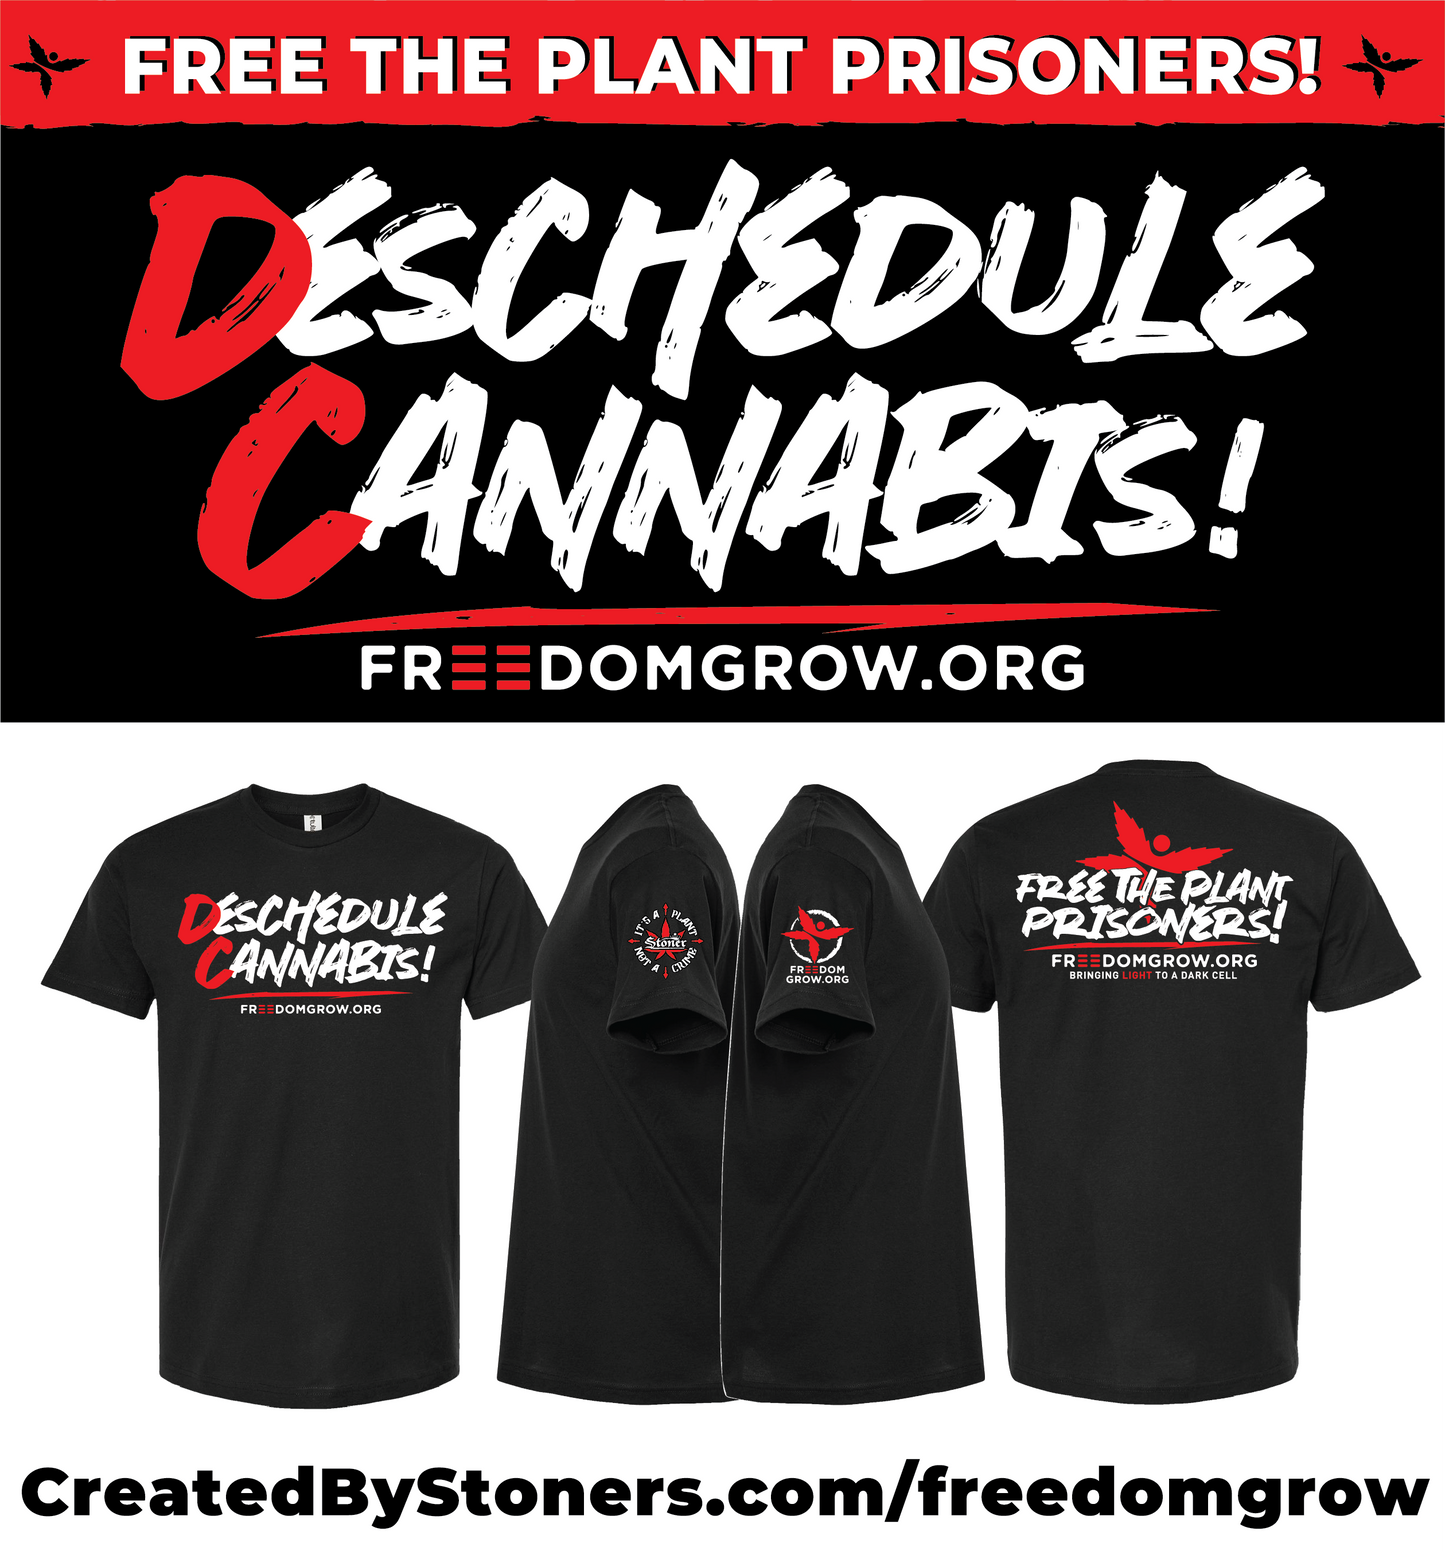 Created By Stoners x FreedomGrow.org Deschedule Collab (Women's)